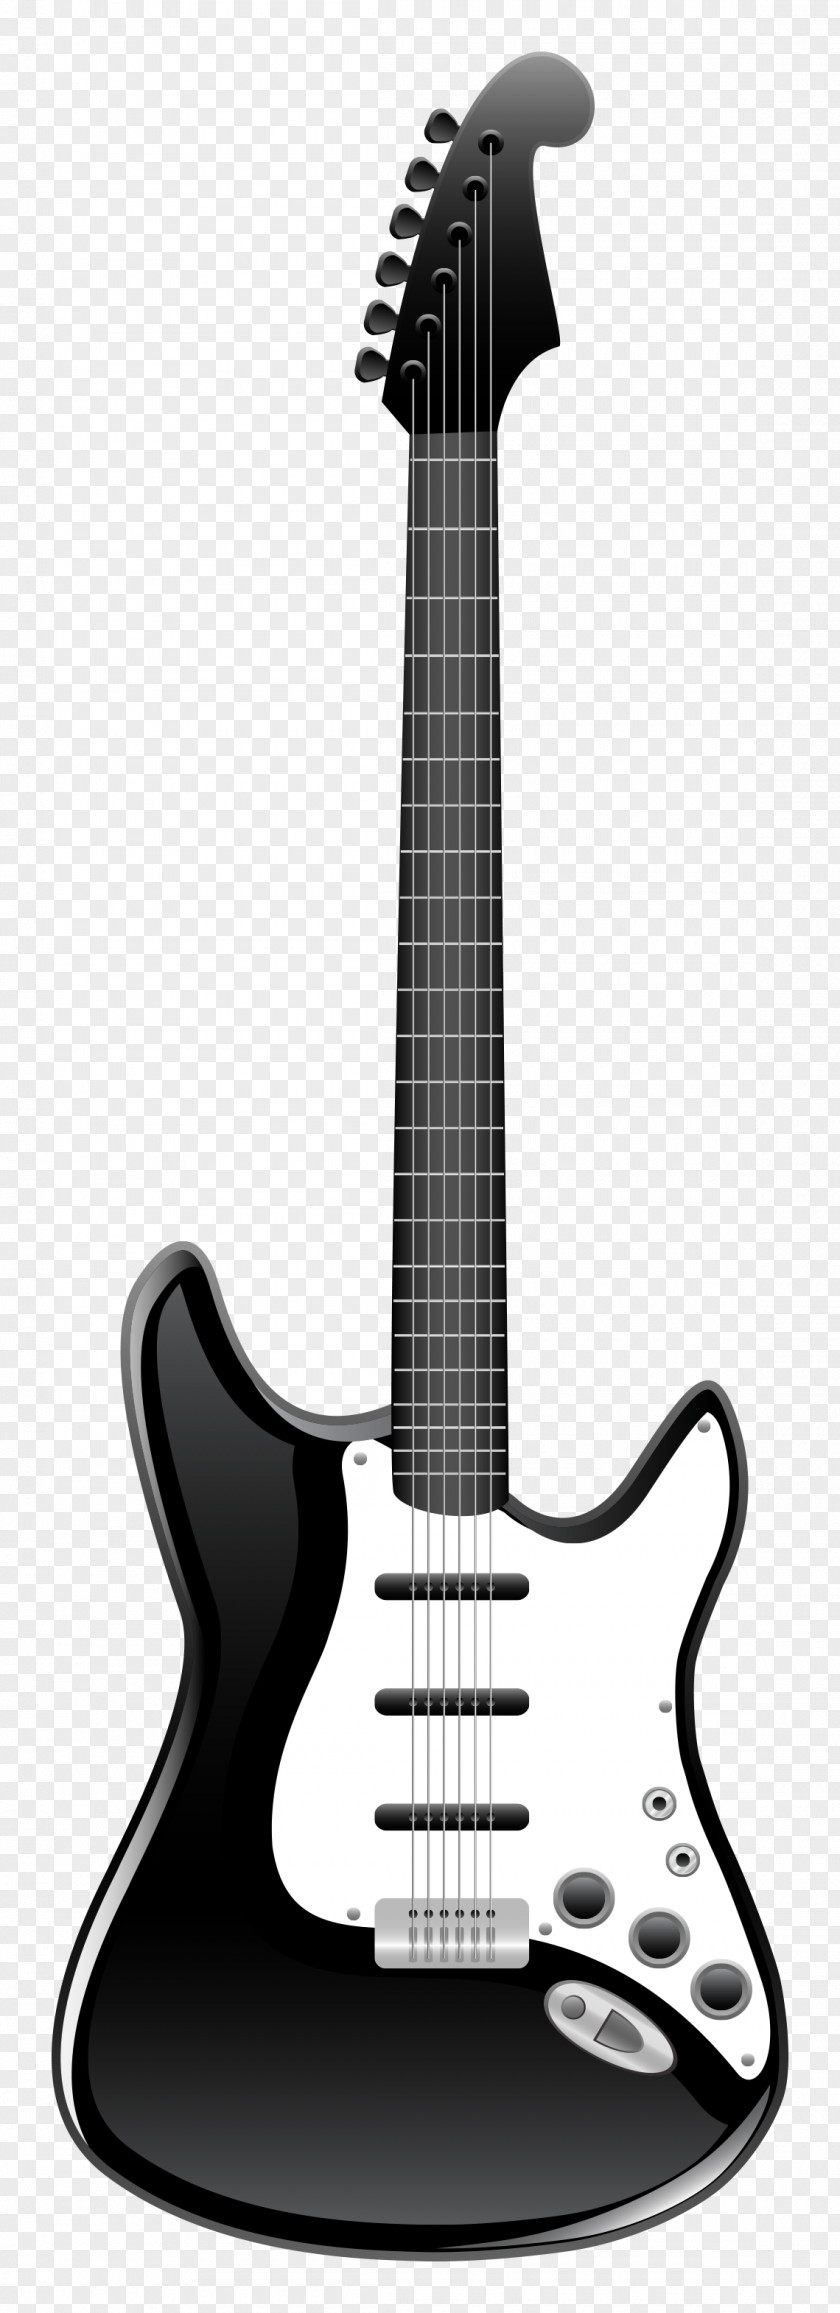 Vector Musical Instruments Acoustic Guitar Electric Black And White Clip Art PNG